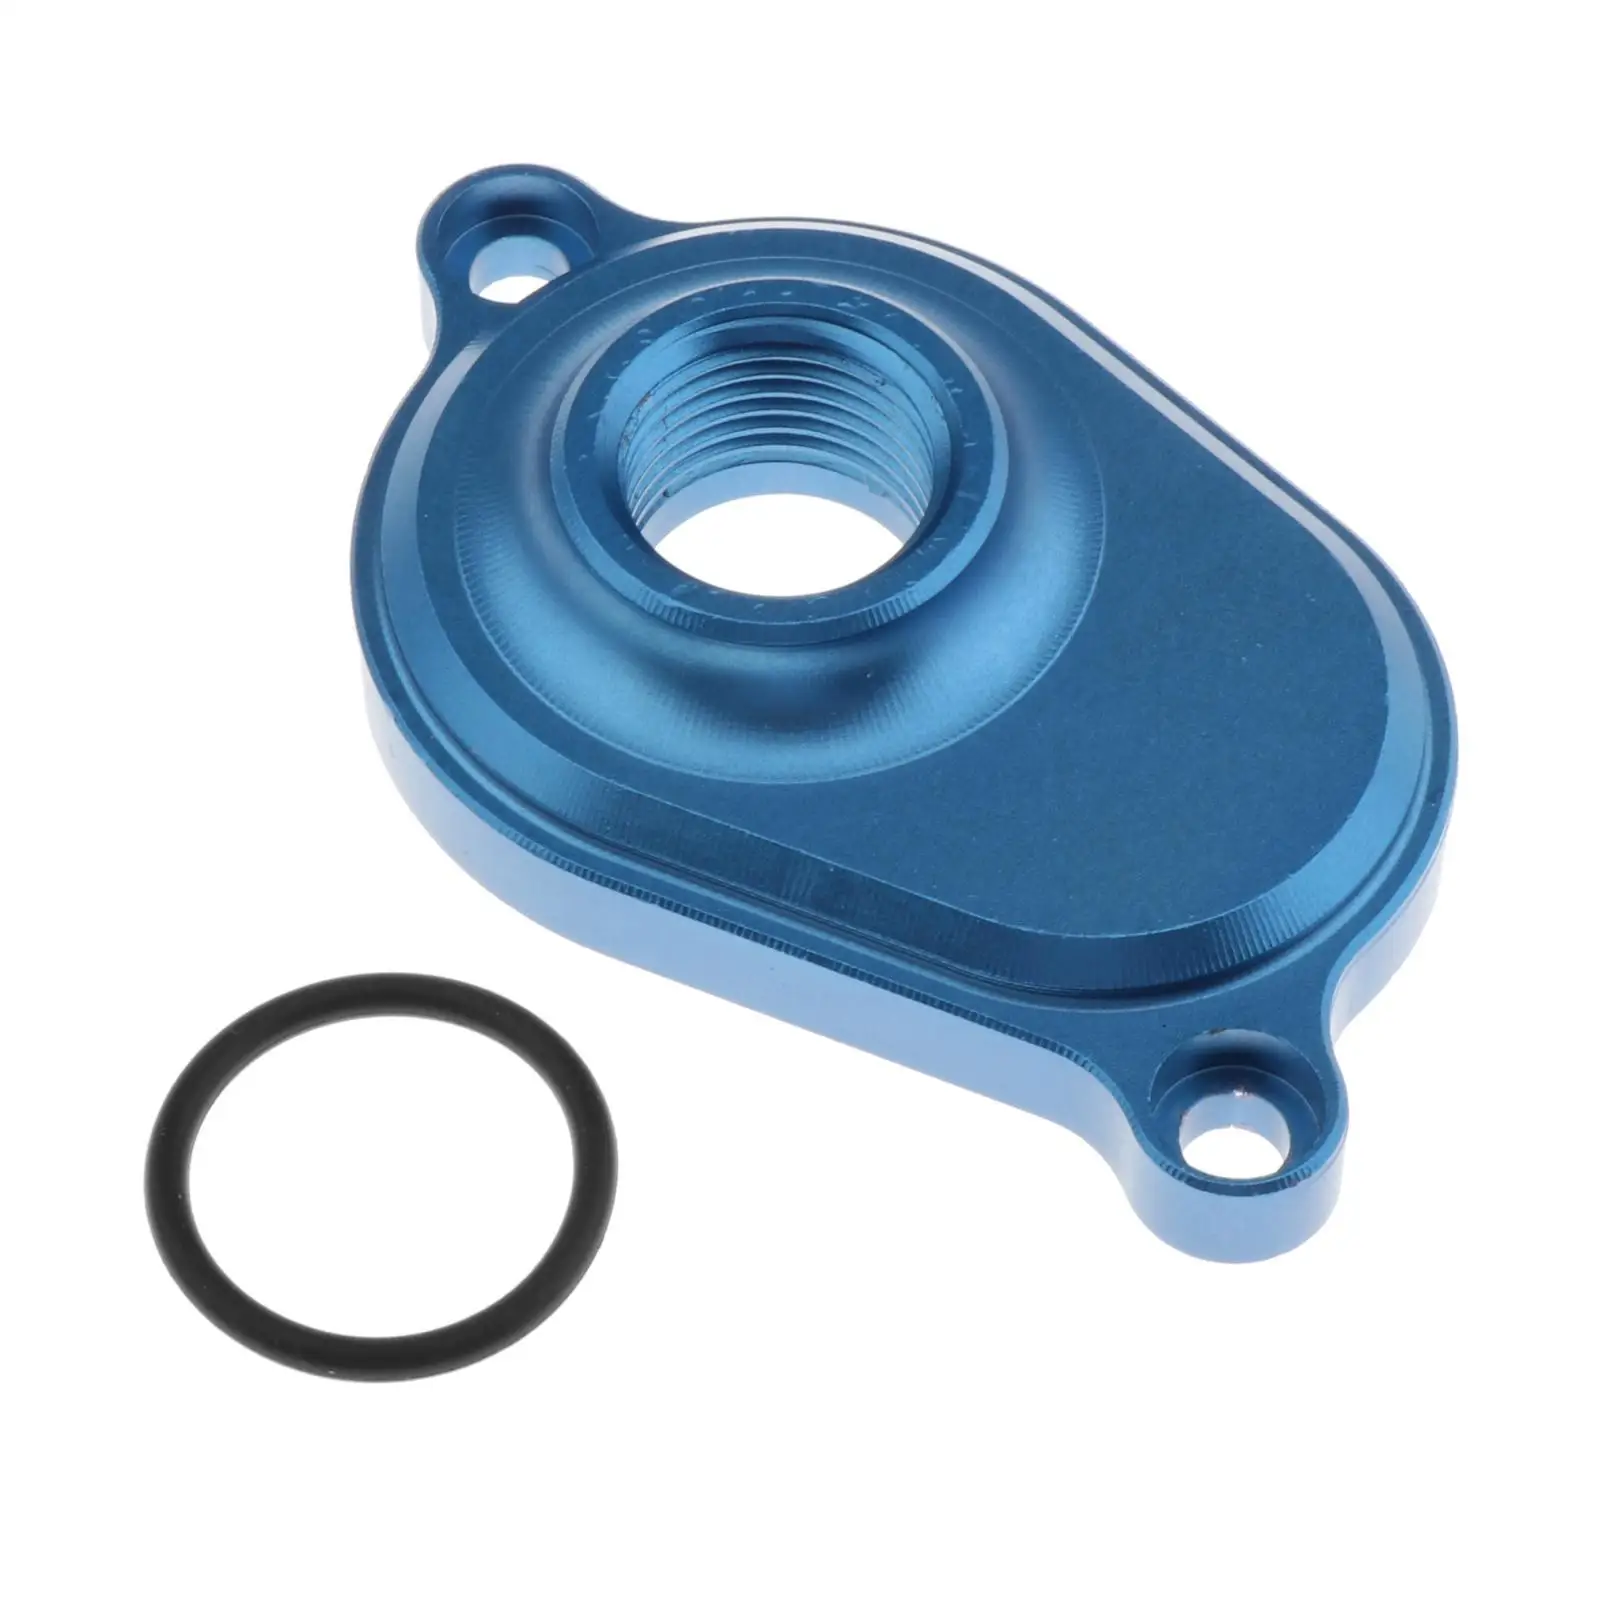 Oil Cooler Back Flush Adapter for    Duty 6.0L 03-07 + 2 Gaskets  of high quality material, reliable quality and durable